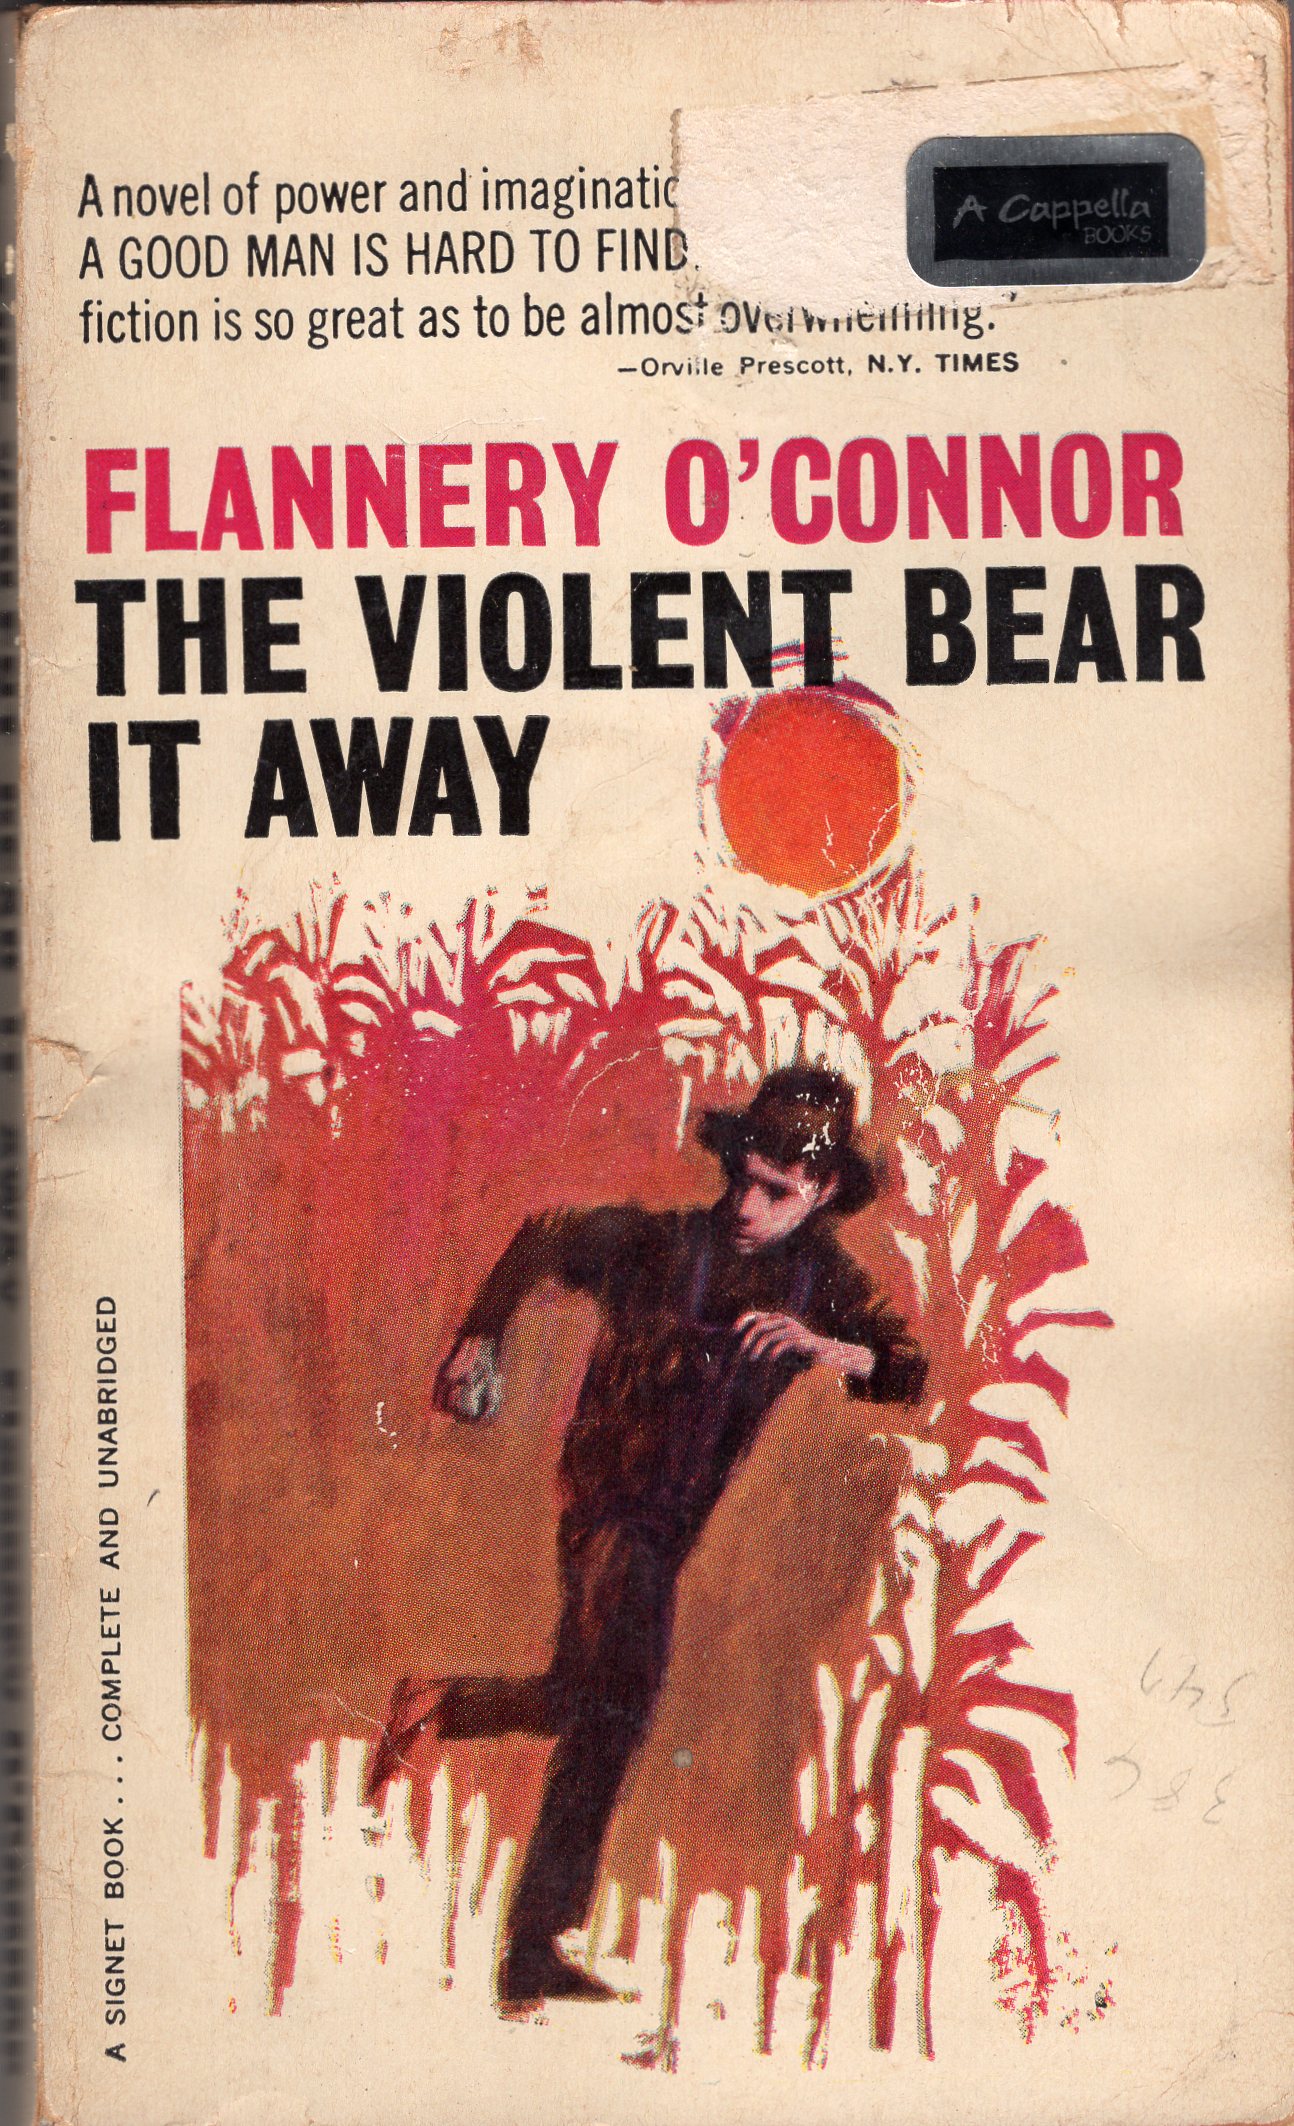 The Violent Bear It Away (Complete and unabridged) - Flannery O'Connor